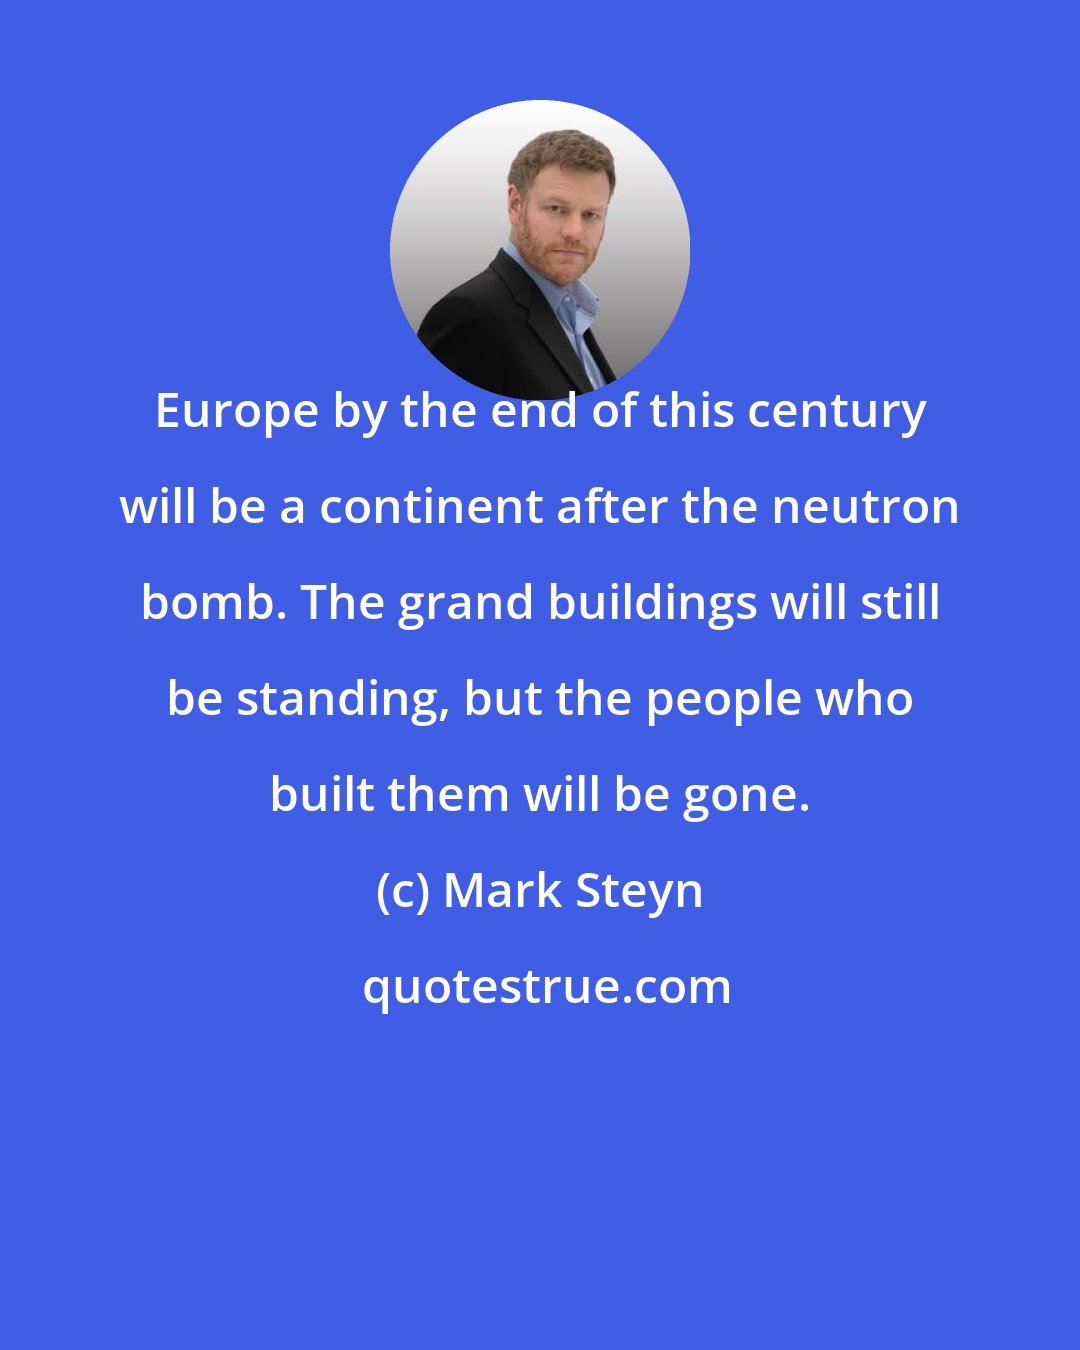 Mark Steyn: Europe by the end of this century will be a continent after the neutron bomb. The grand buildings will still be standing, but the people who built them will be gone.